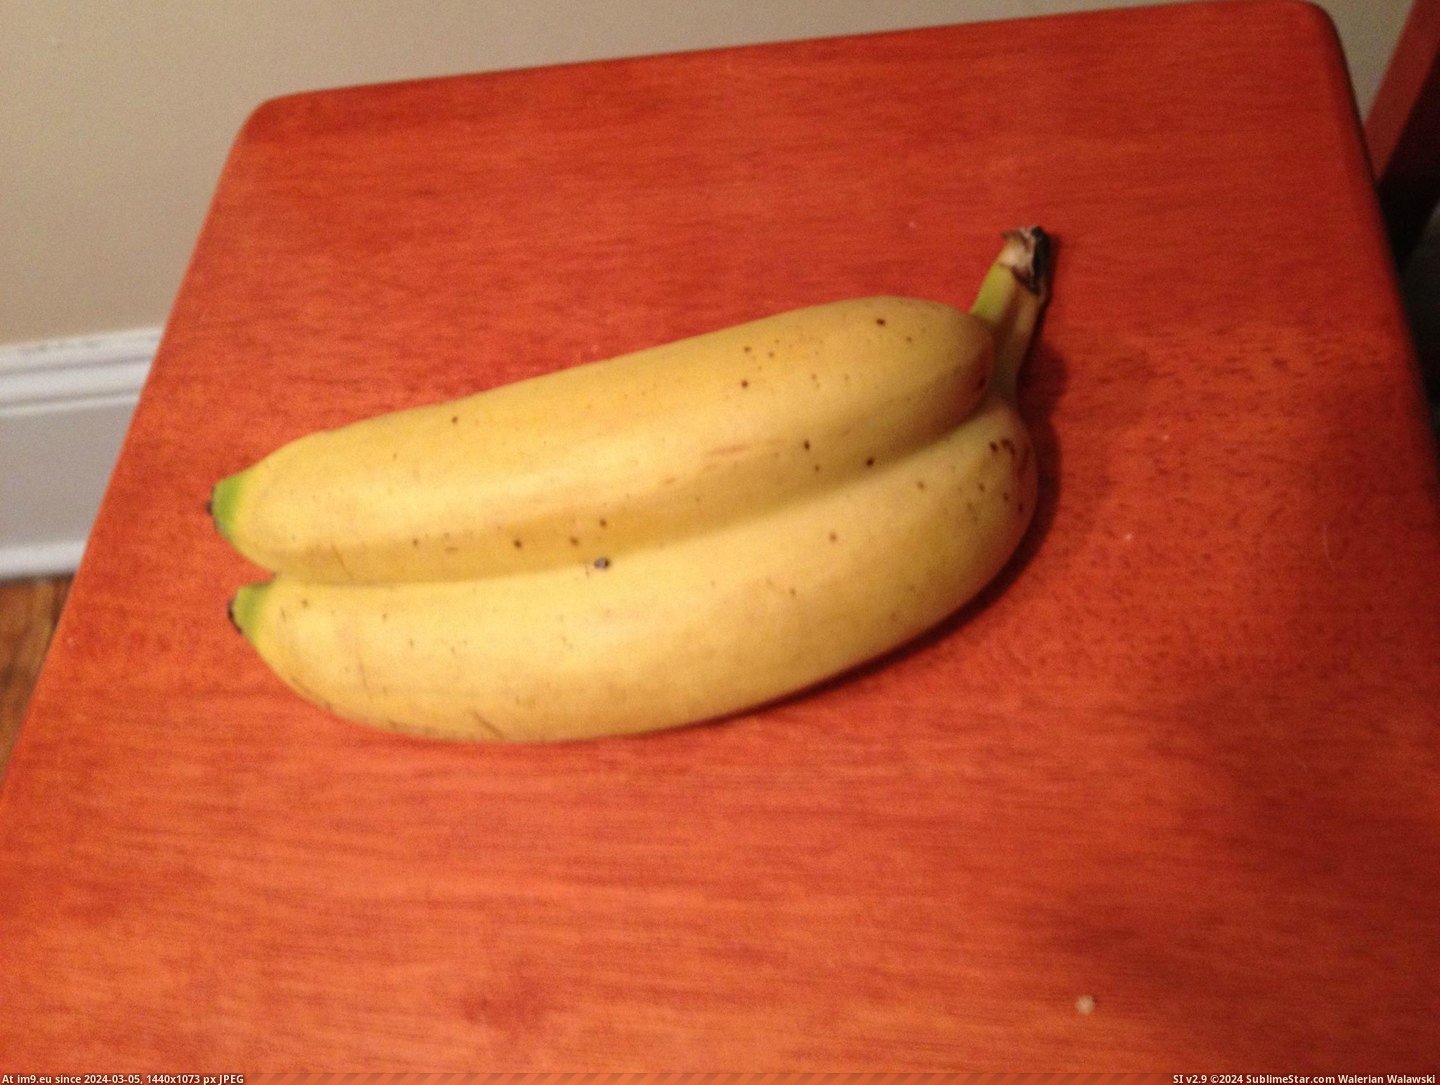 #Two #Bananas #Fused #Are [Mildlyinteresting] These two bananas are fused together Pic. (Изображение из альбом My r/MILDLYINTERESTING favs))